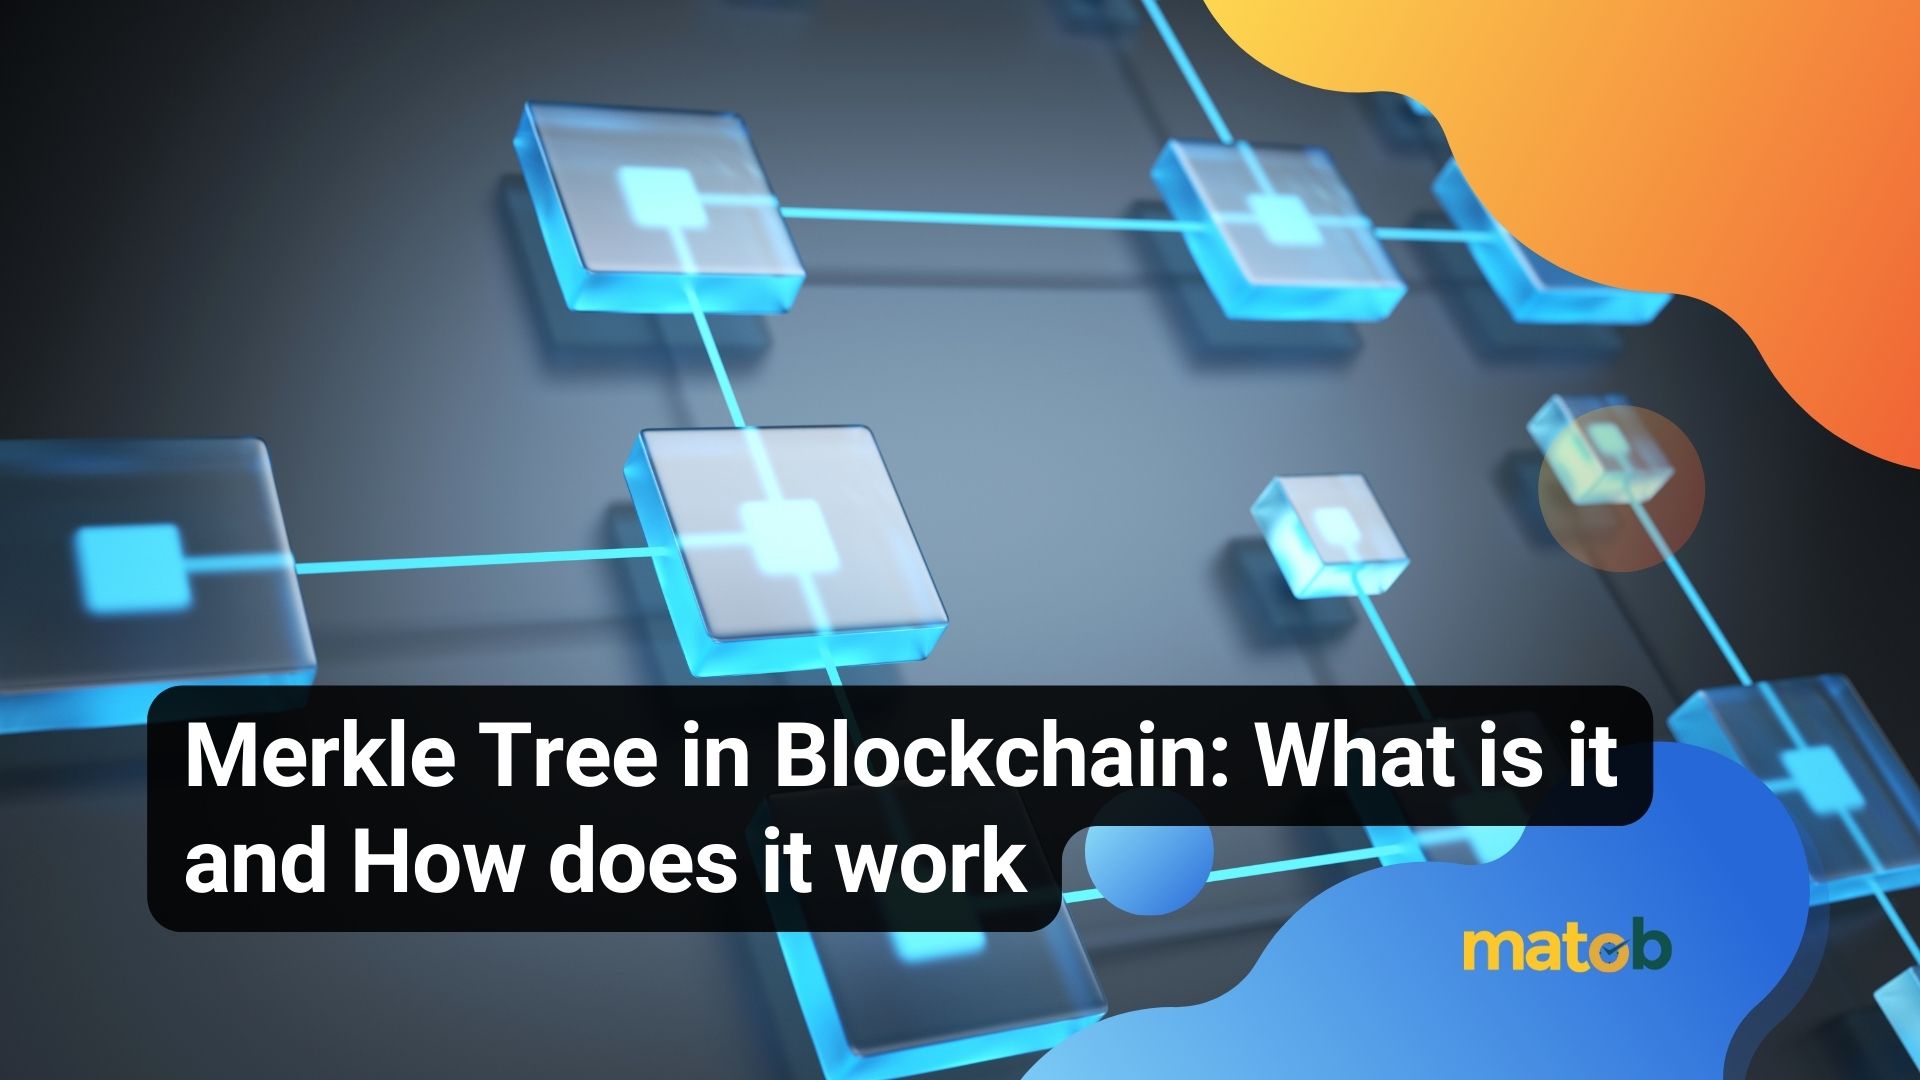 Merkle Tree in Blockchain: What is it and How does it work